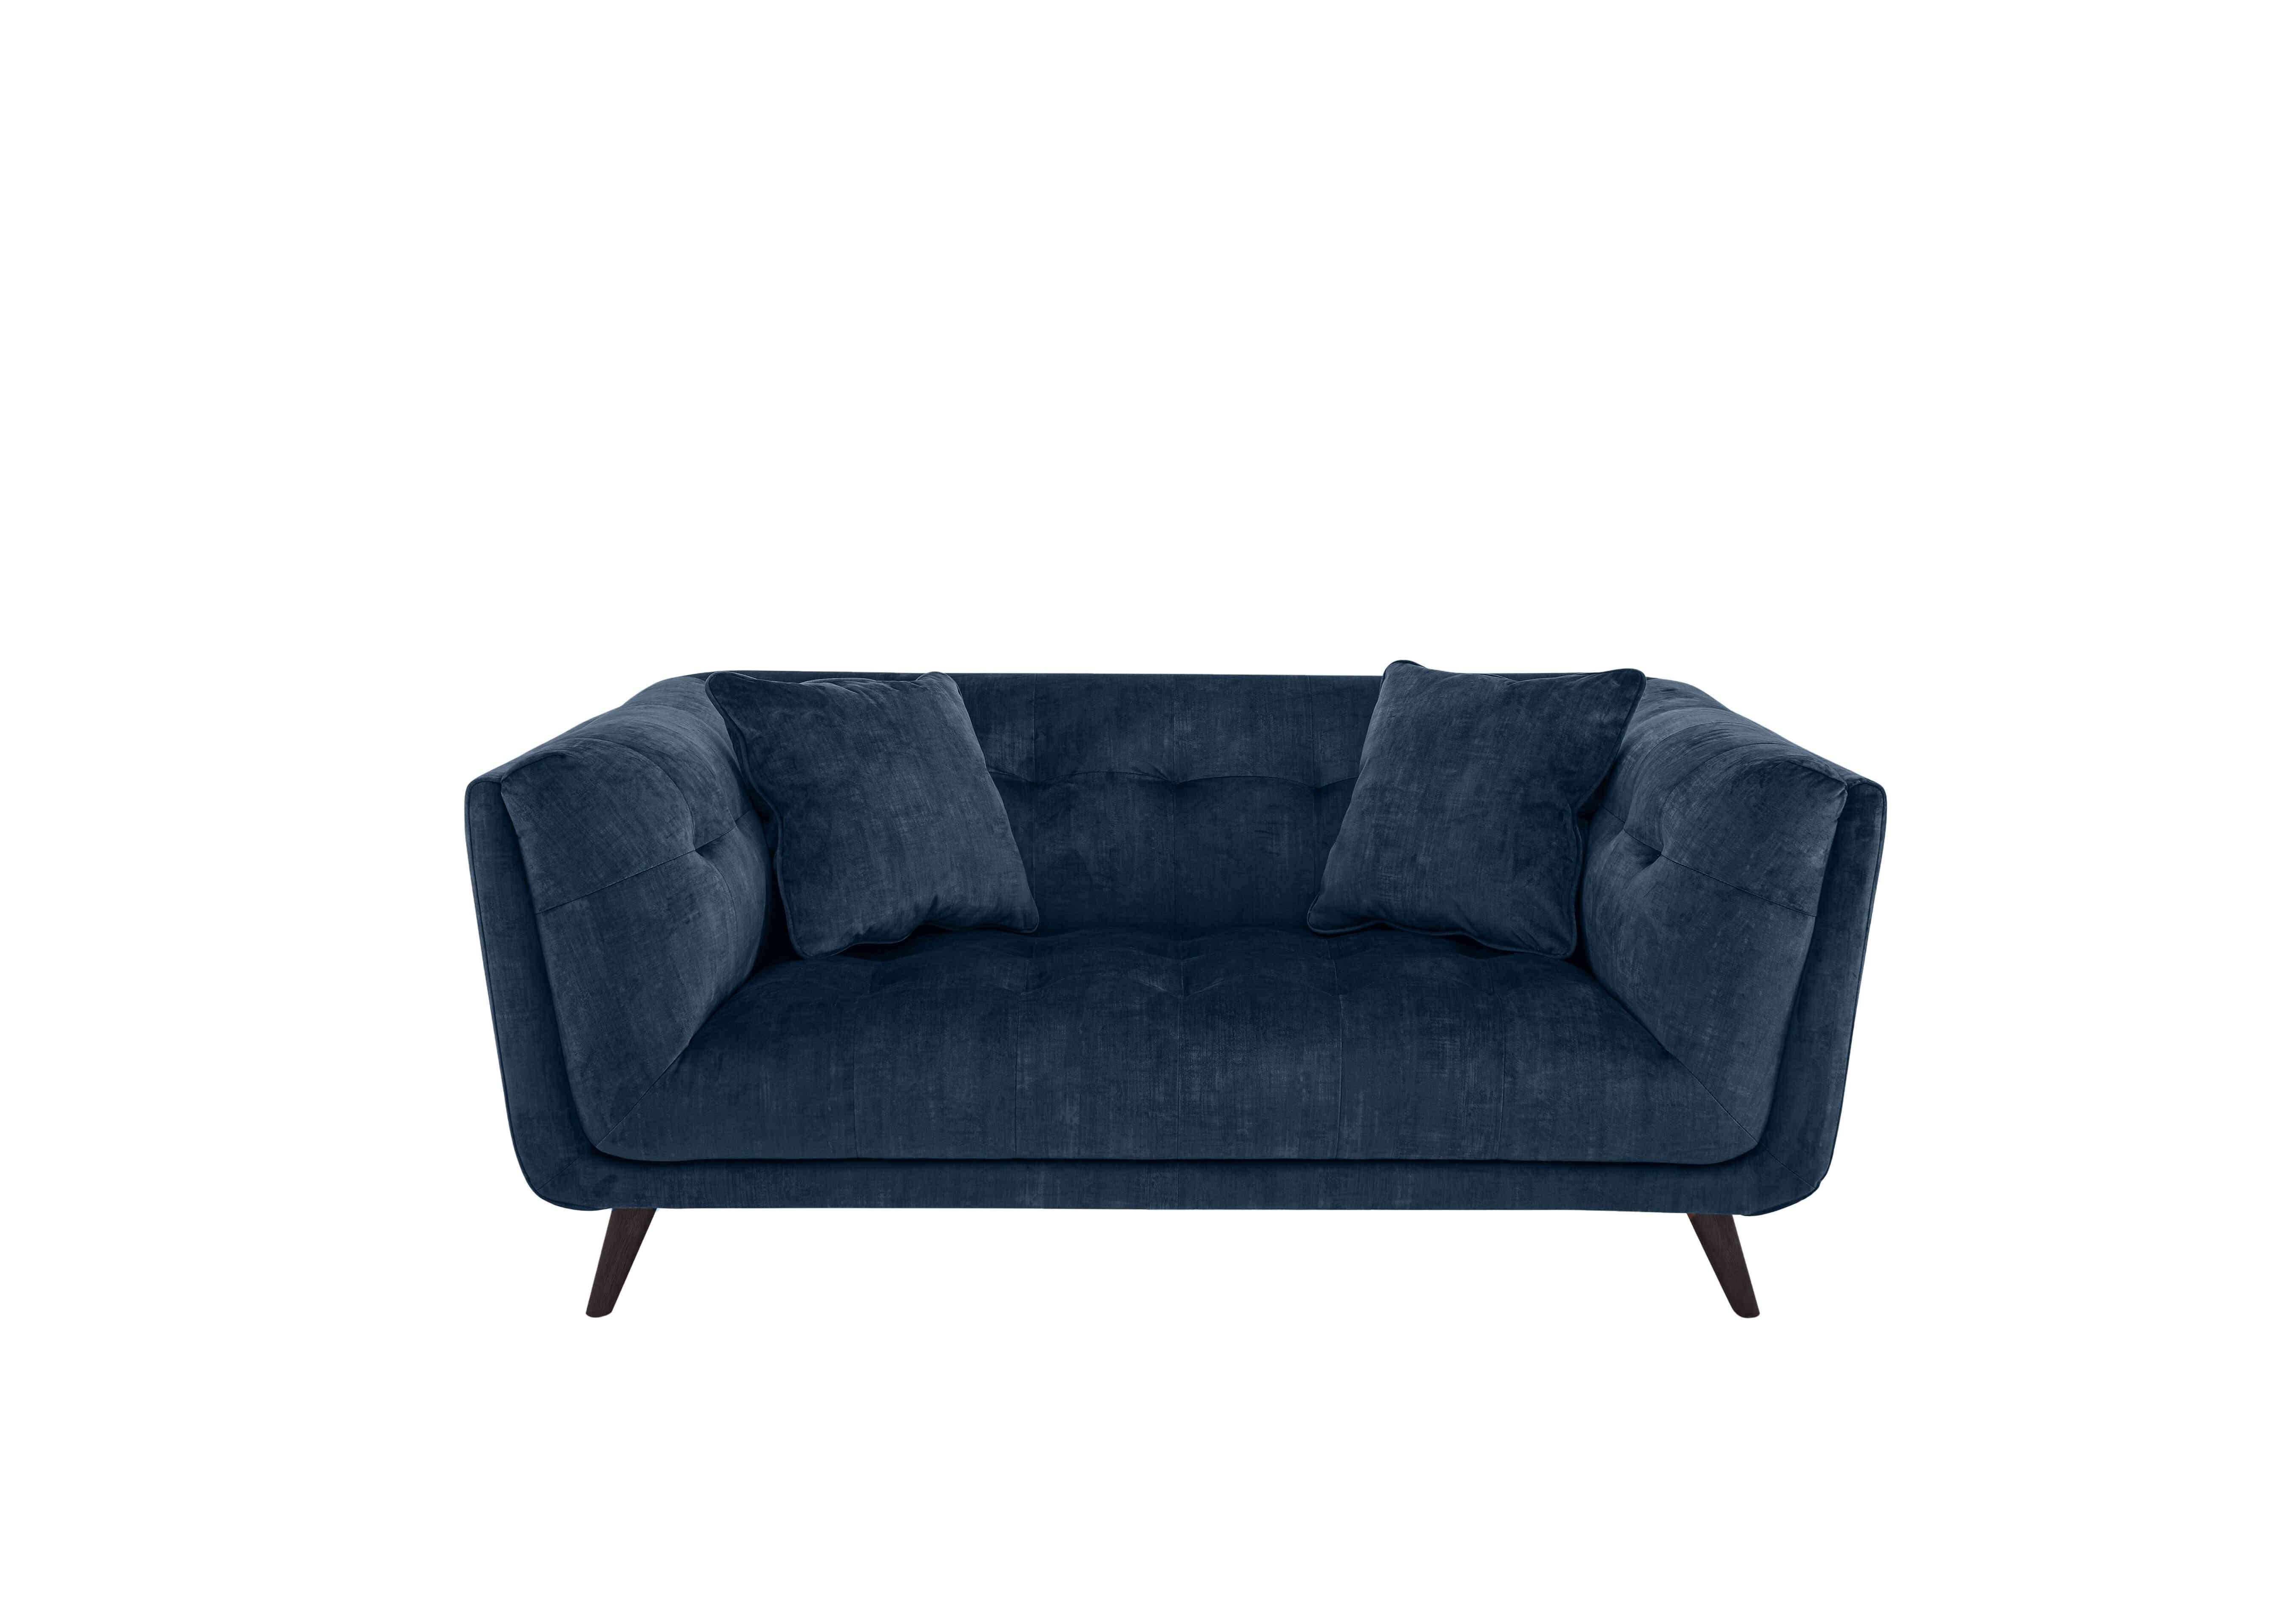 Rene 2 Seater Fabric Sofa in Heritage 52000 Airforce Es Ft on Furniture Village